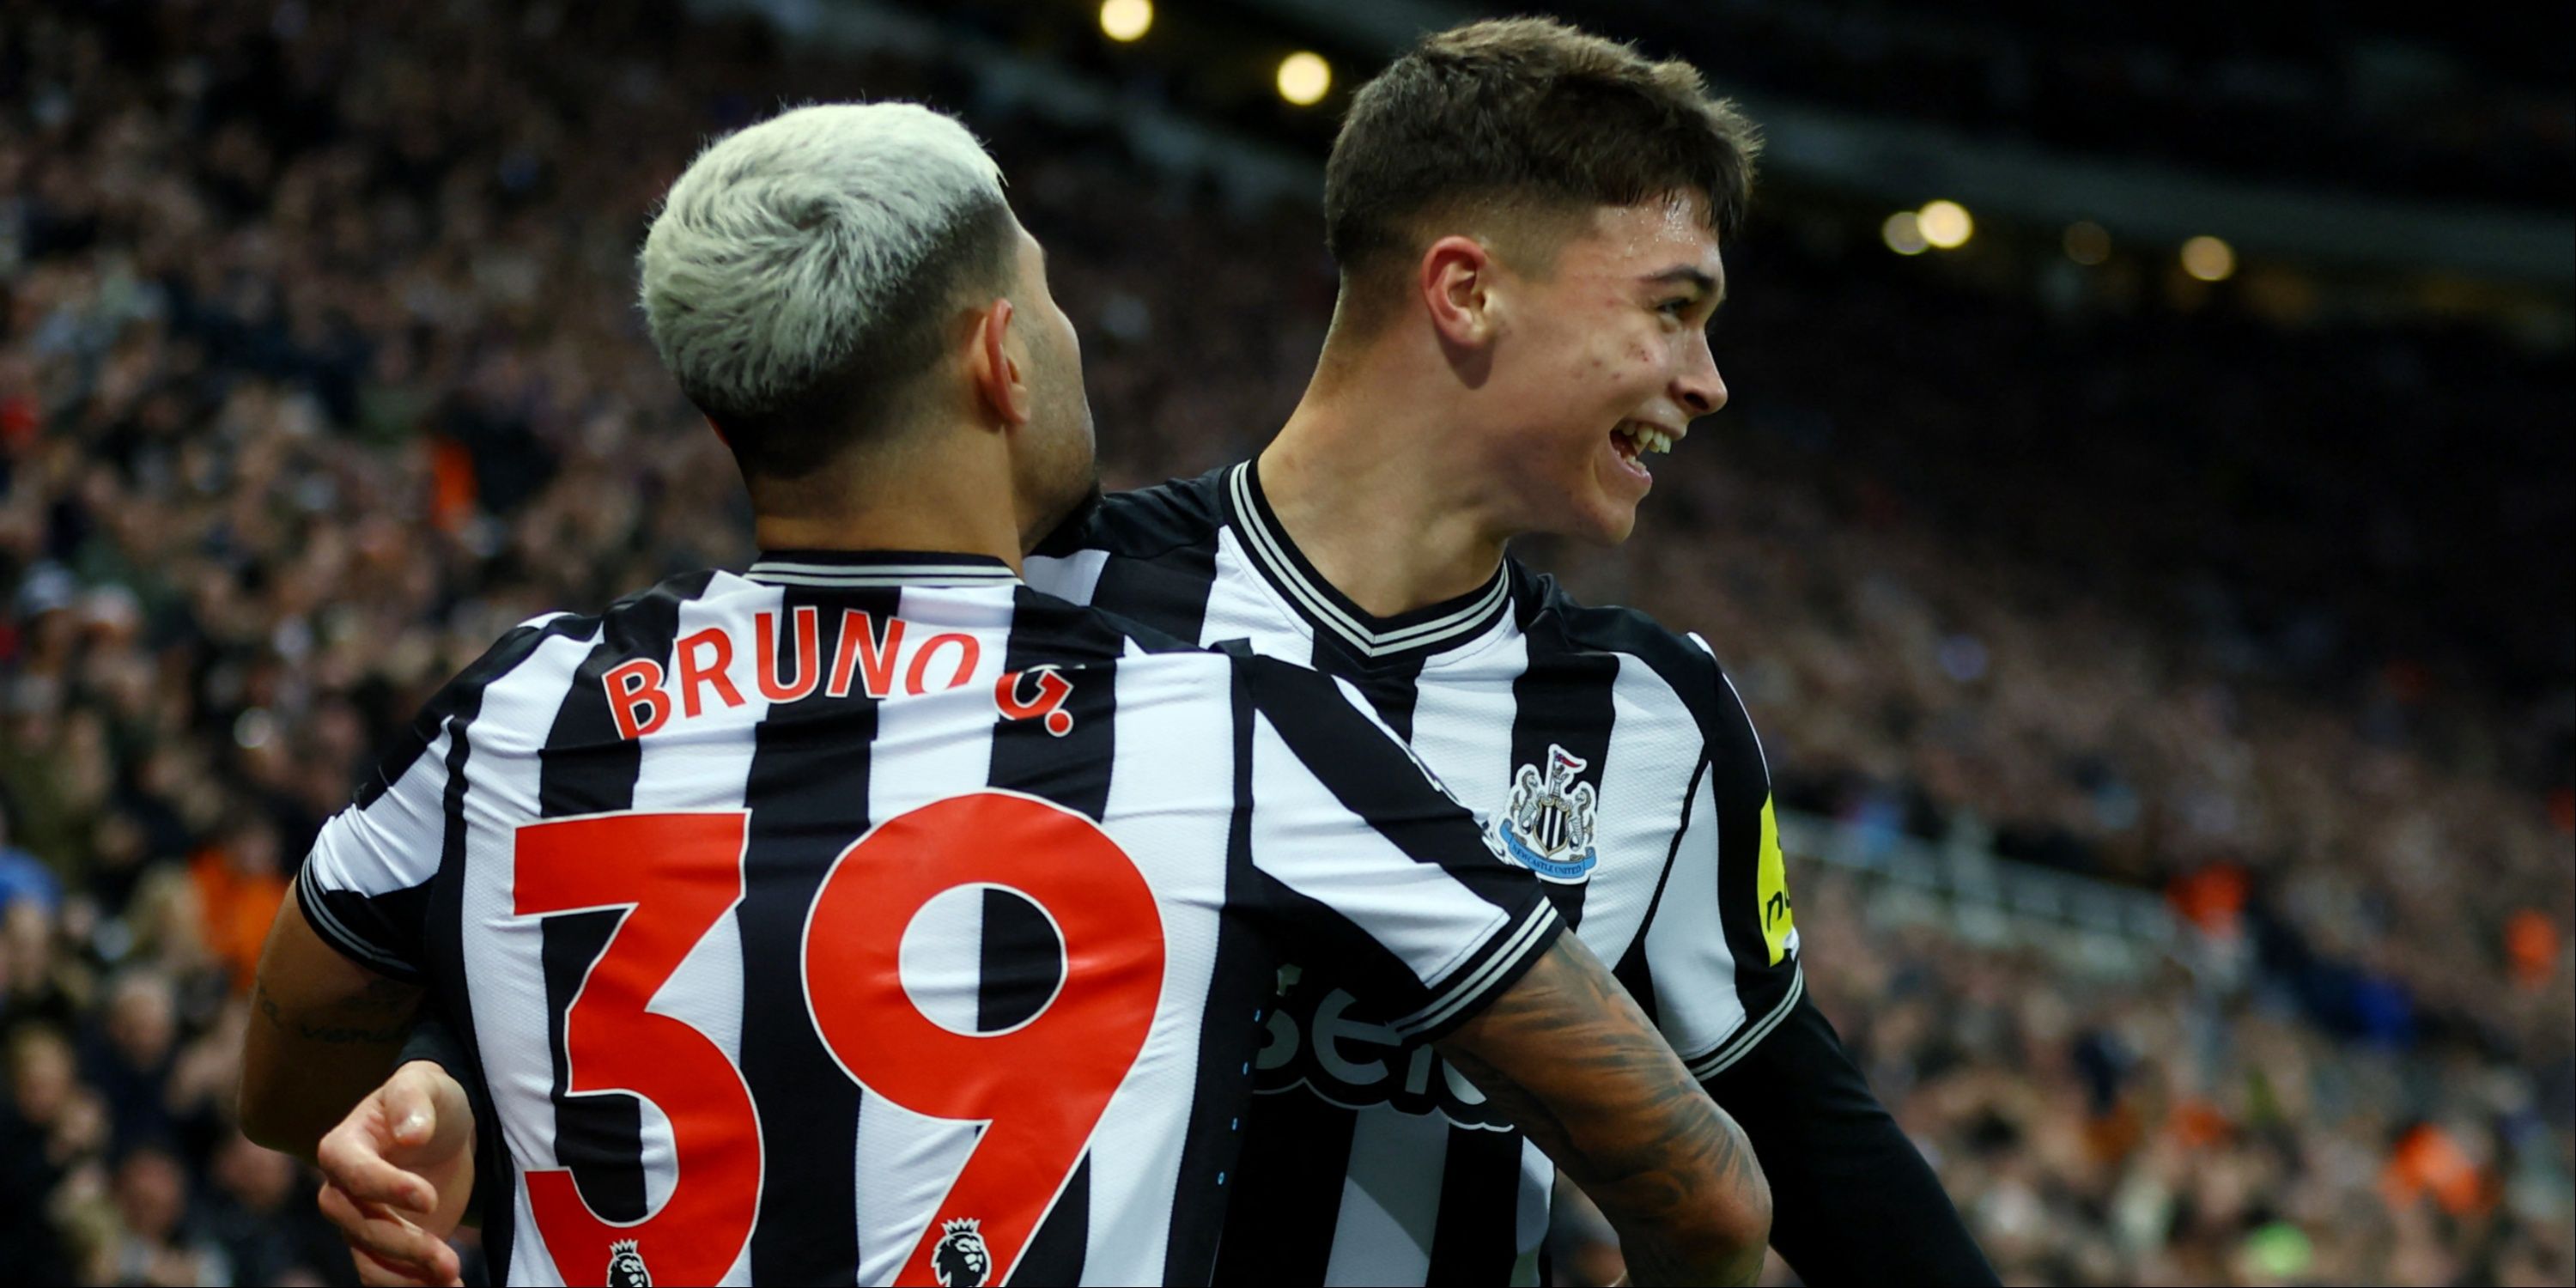 newcastle may have sold another lewis miley for just £1.5m